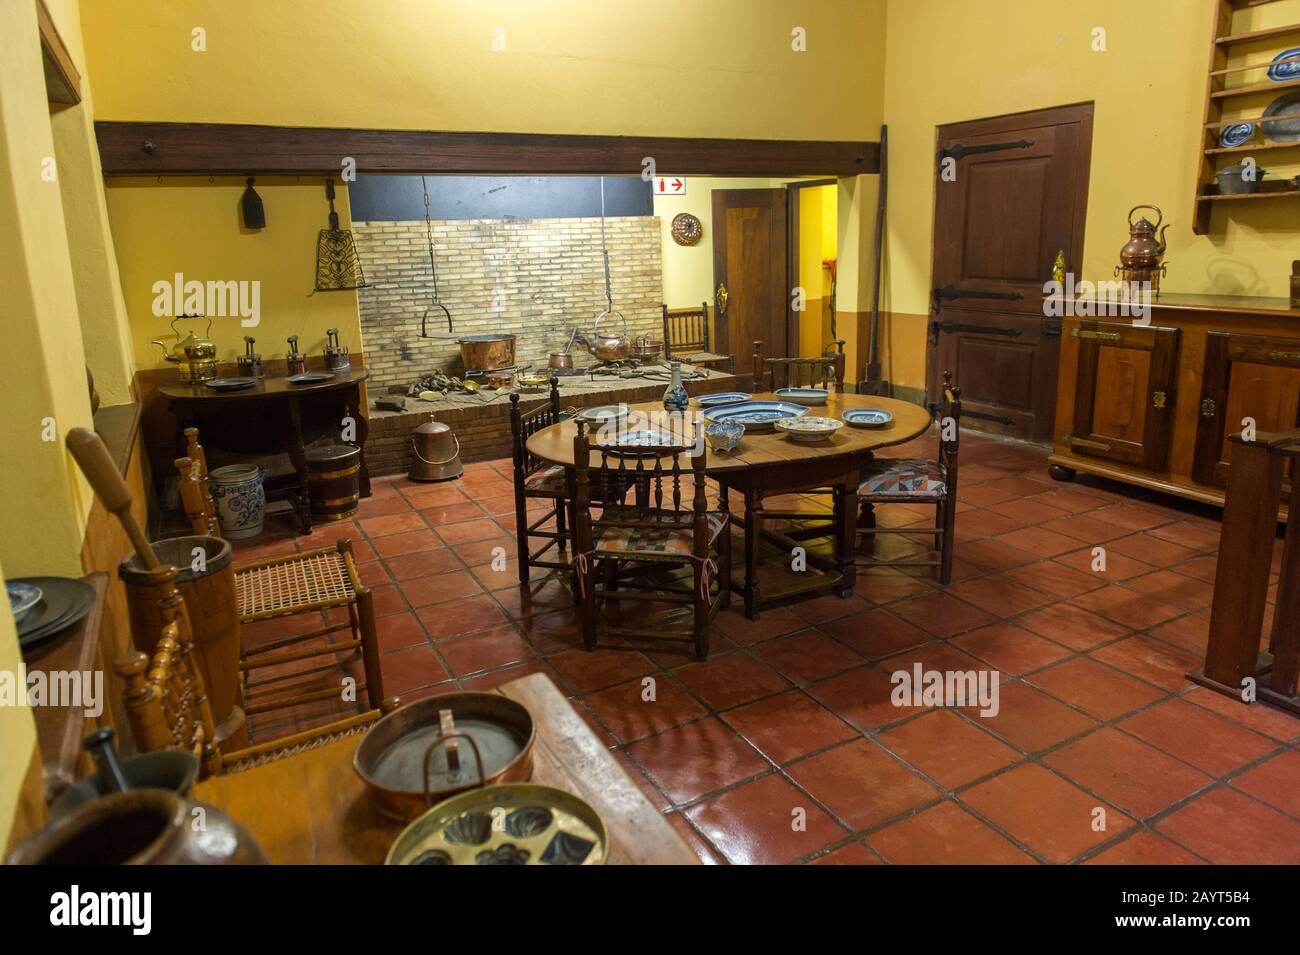 Interior of the homestead museum at Groot Constantia, a historic wine estate near Cape Town, South Africa. Stock Photo